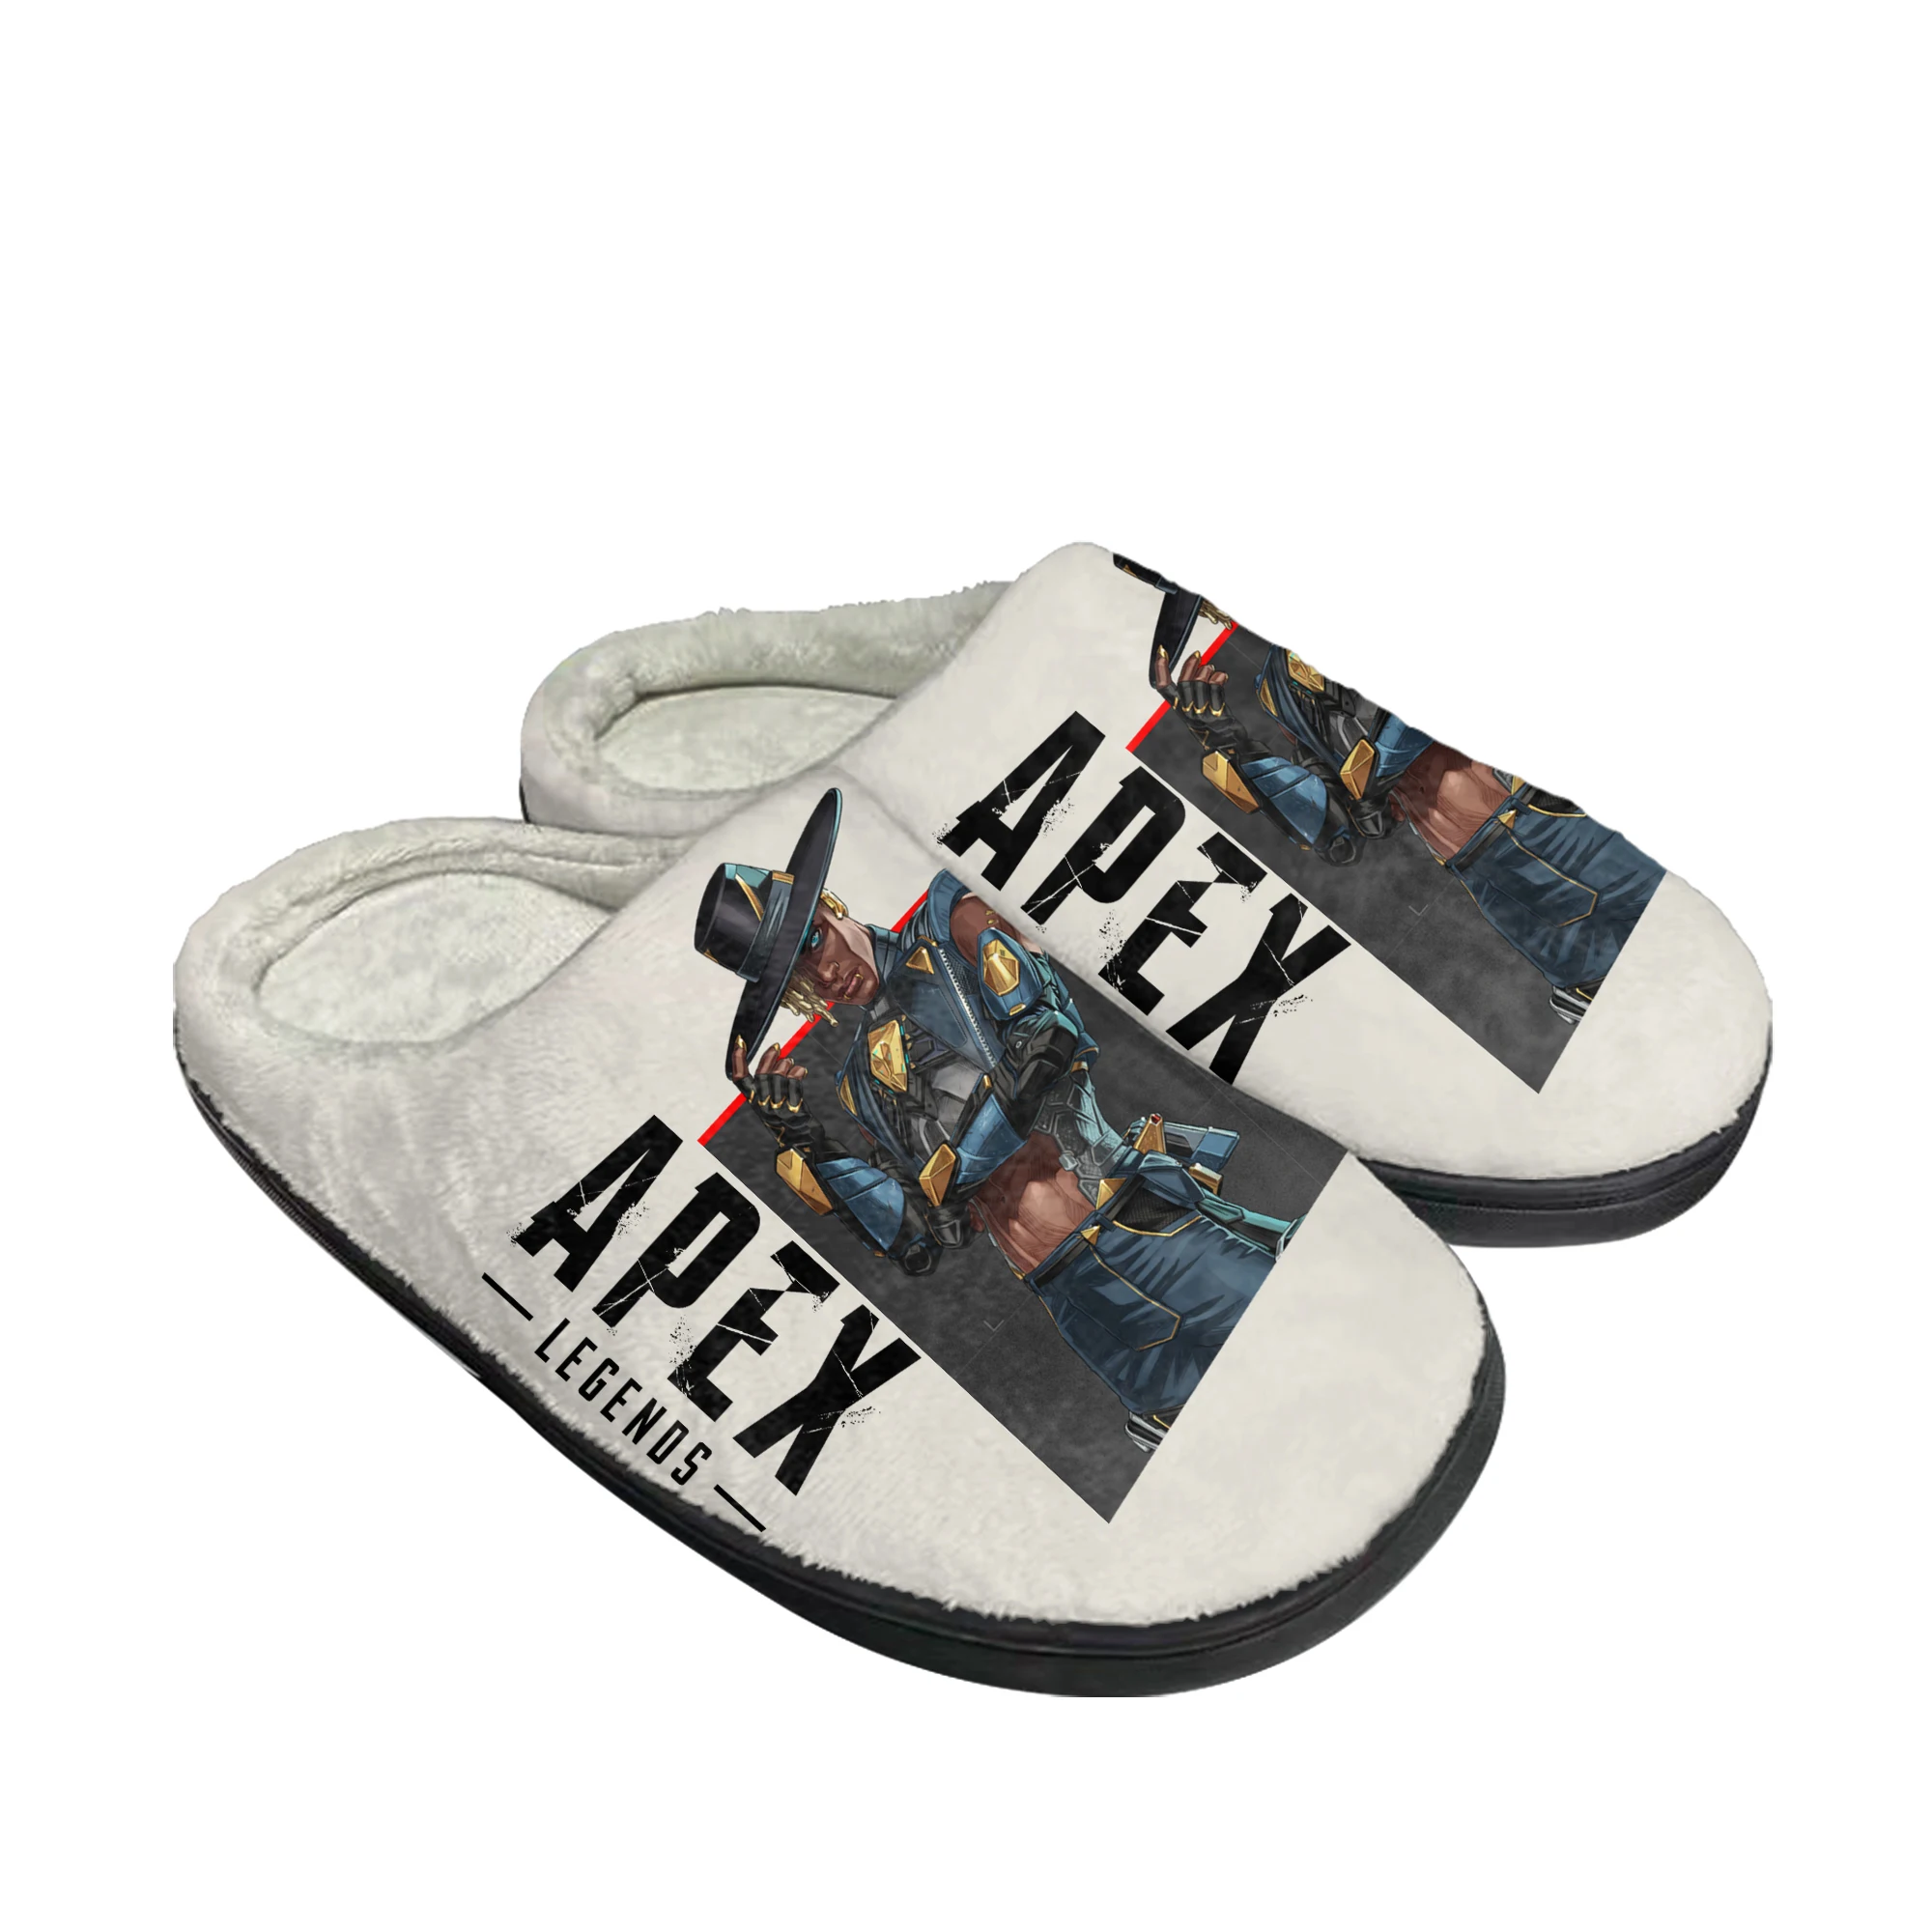 

Apex Legends Seer Home Cotton Slippers Hot Cartoon Game Mens Womens Plush Bedroom Casual Keep Warm Shoes Tailor Made Slipper